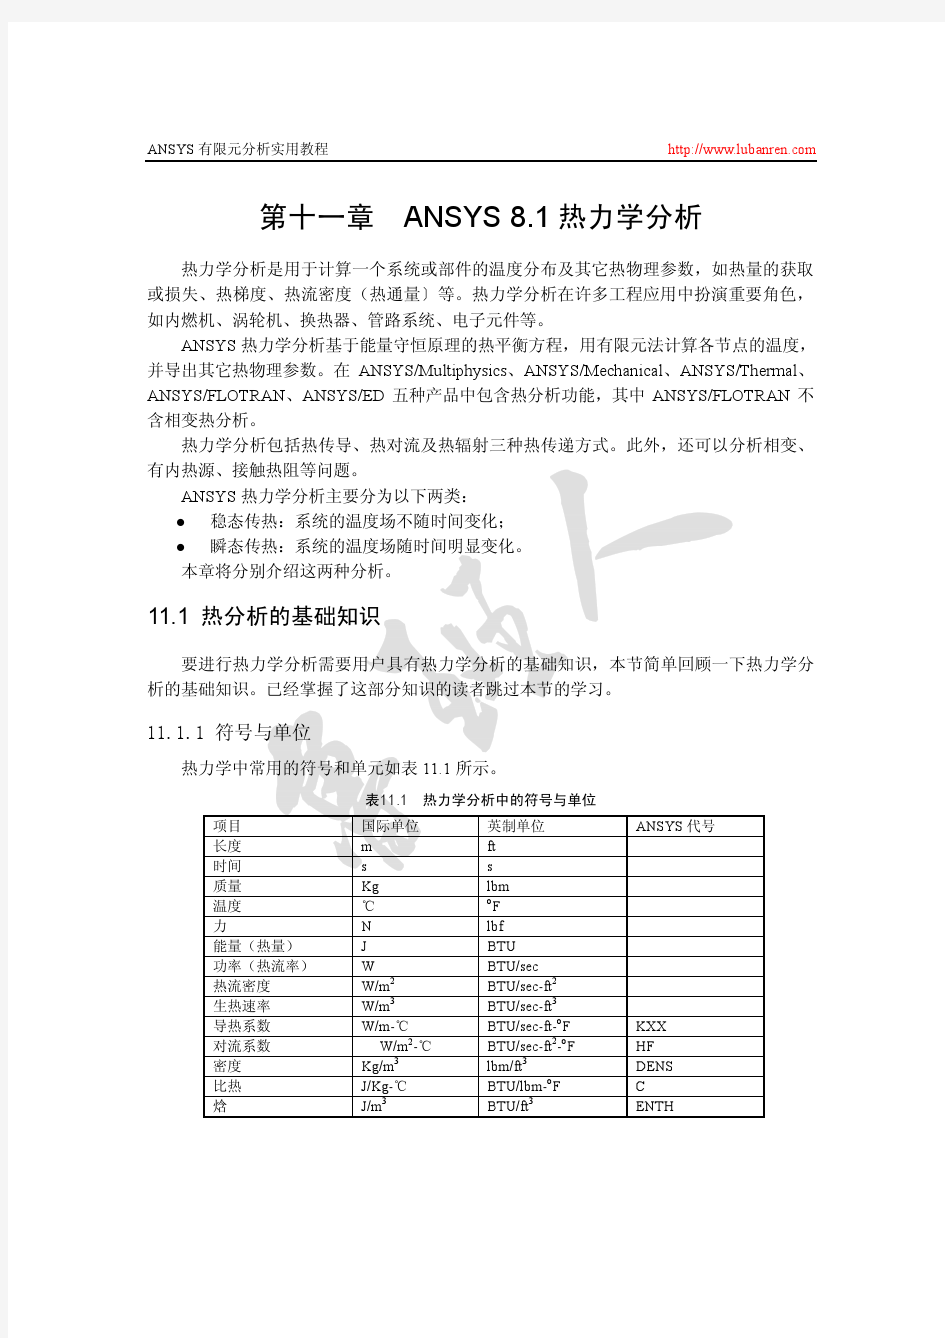 Chapter-11：ANSYS 8.1热力学分析